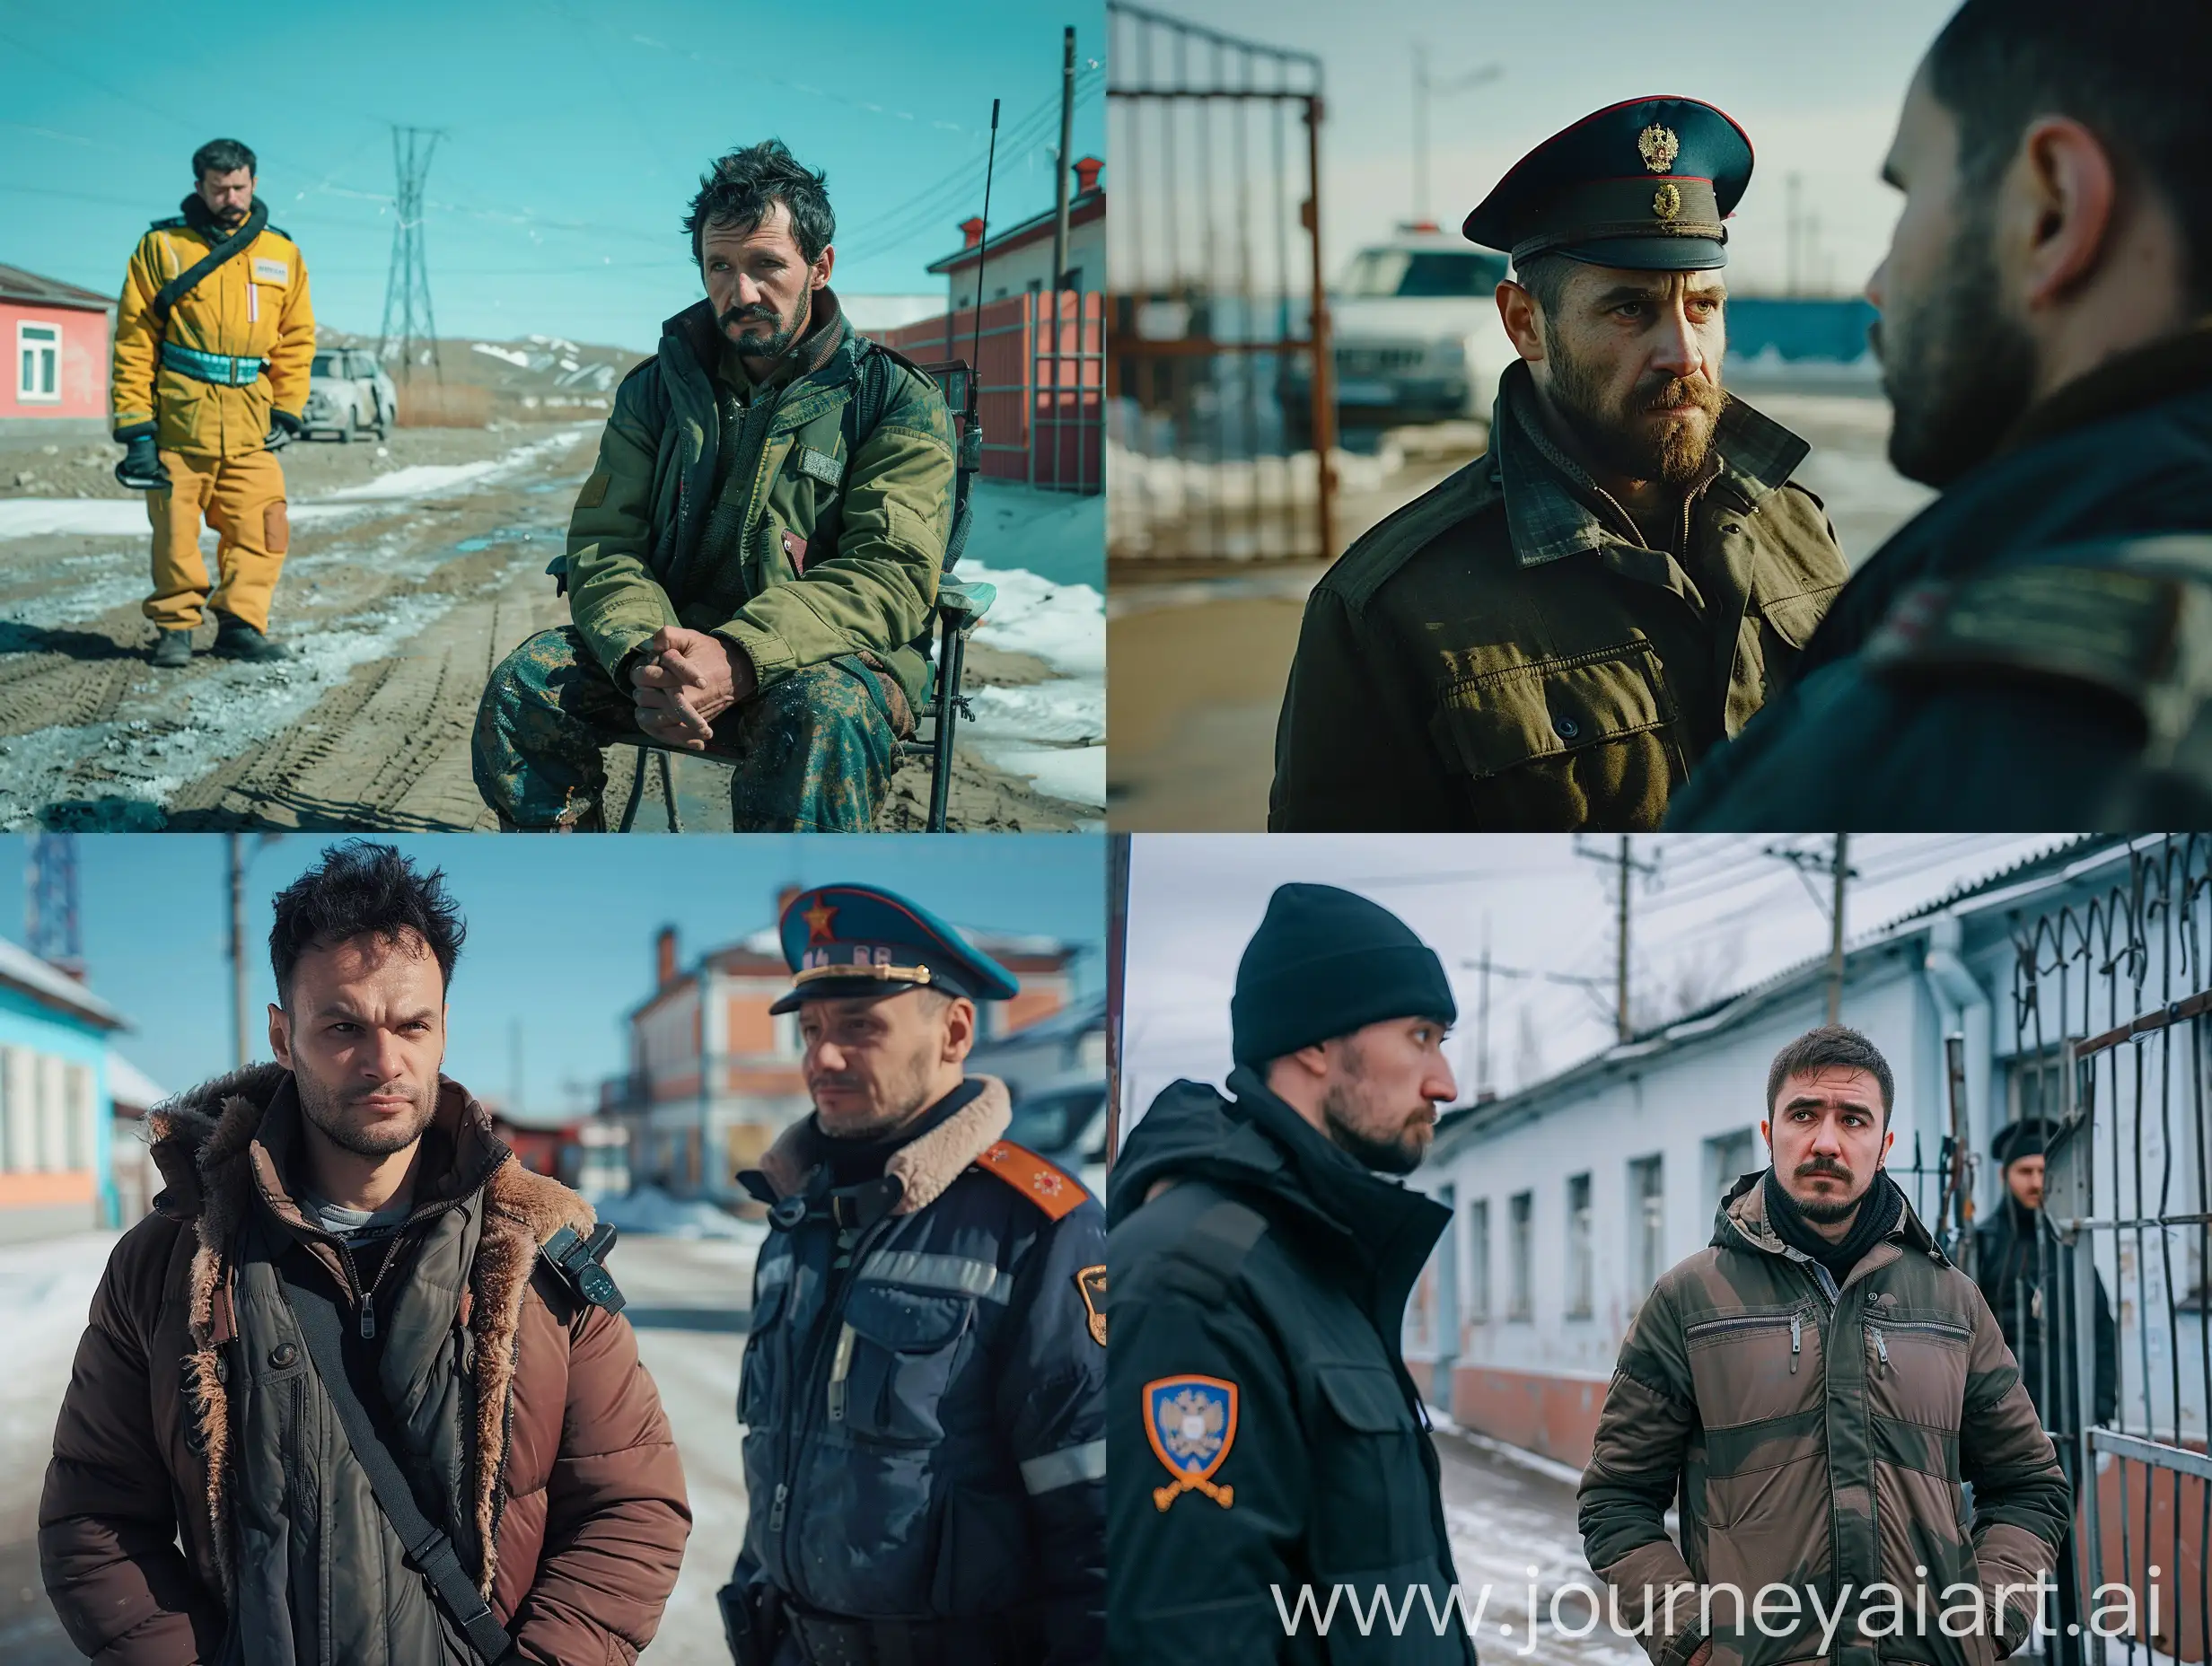 A spanish man visiting Barnaul, in Siberia and is detained by a harsh russian policeman for no reason, desperate, wants to explain, but in vain